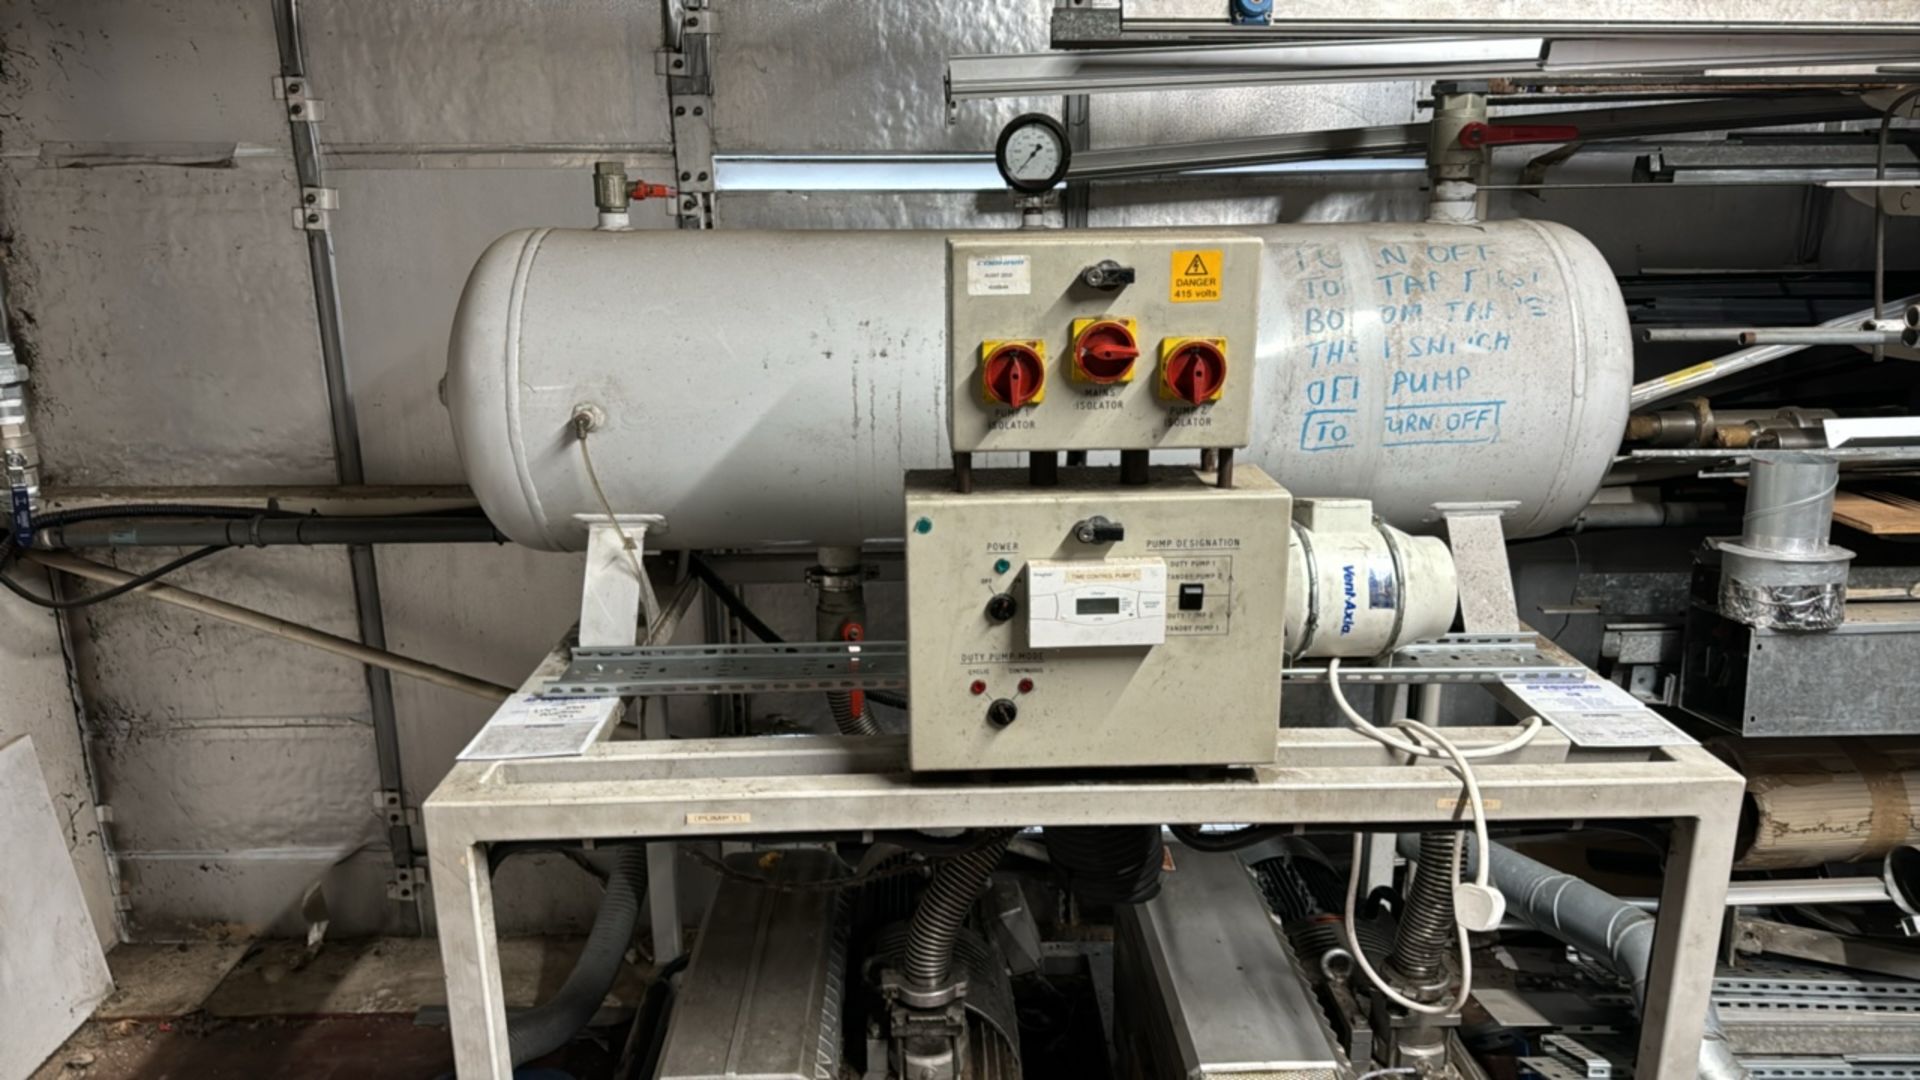 Vent Axia AirTrak Vacuum System Includes Compressor and 2 x BUSCH Rotary Vane Vacuum Pumps - Image 3 of 11